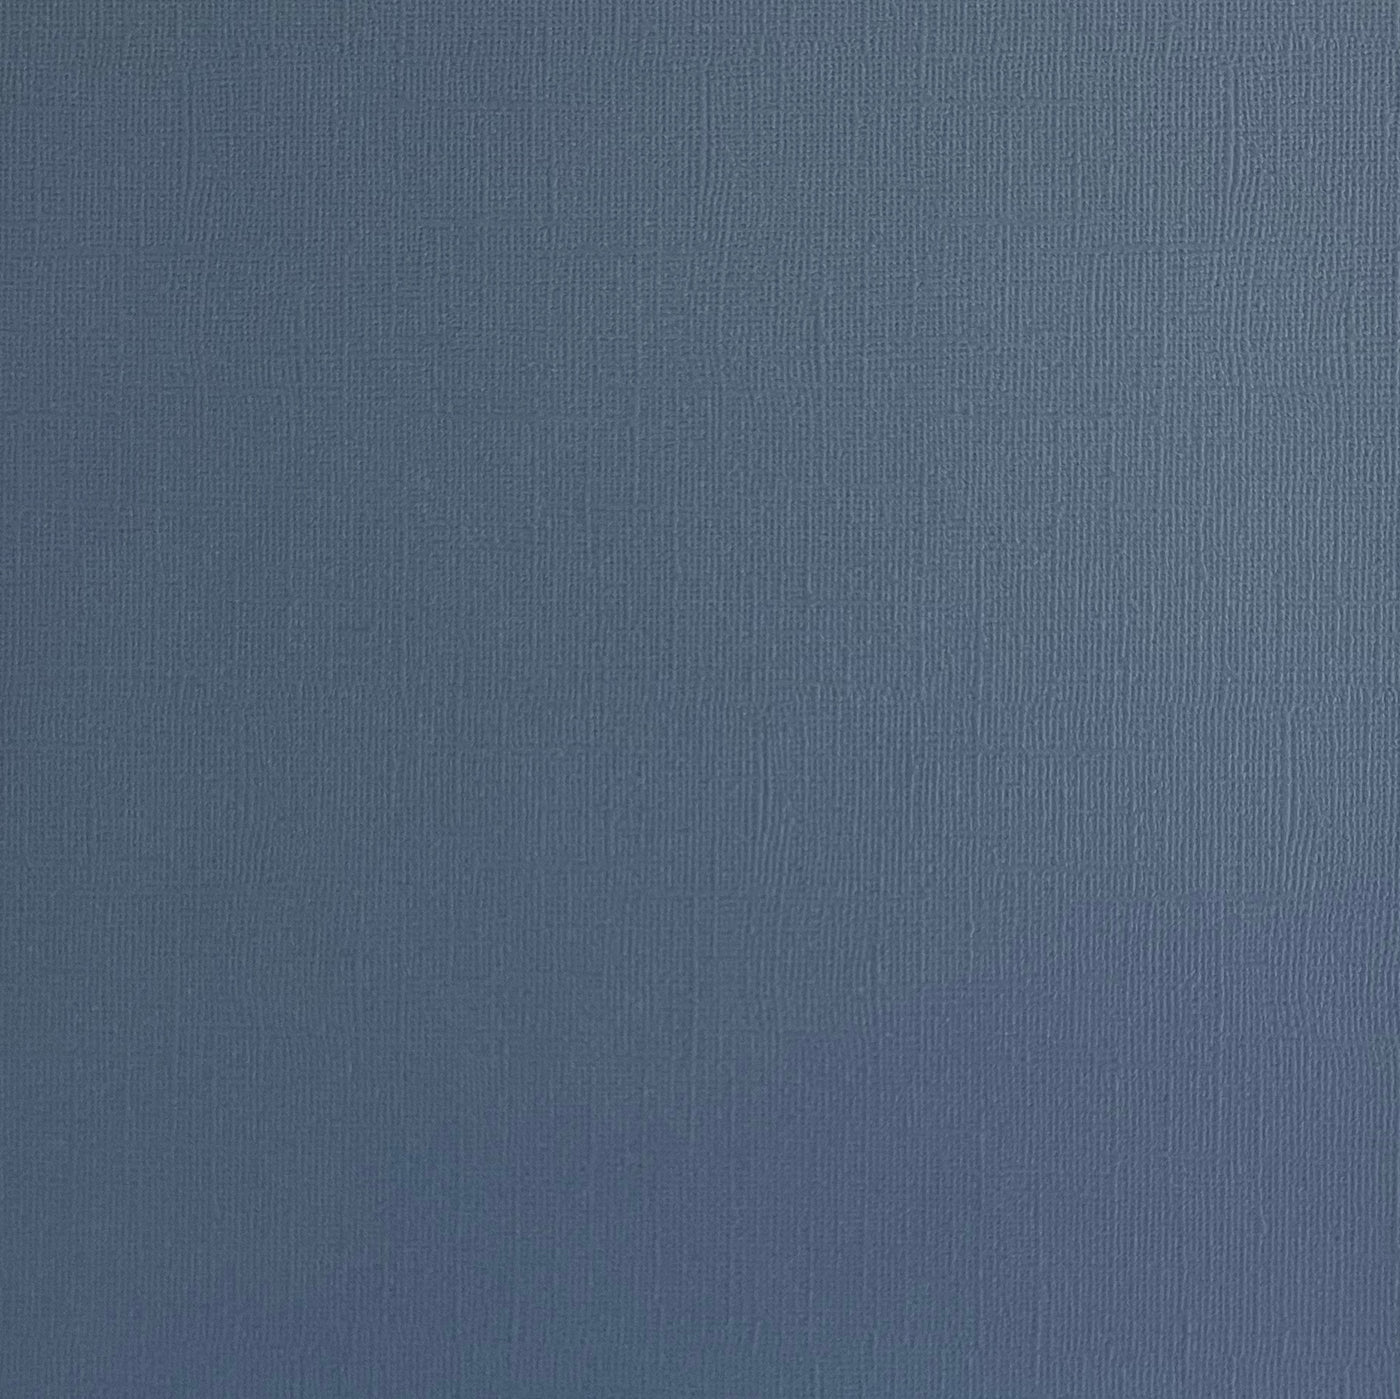 GRAY BLUE - Textured 12x12 Cardstock - Encore Paper